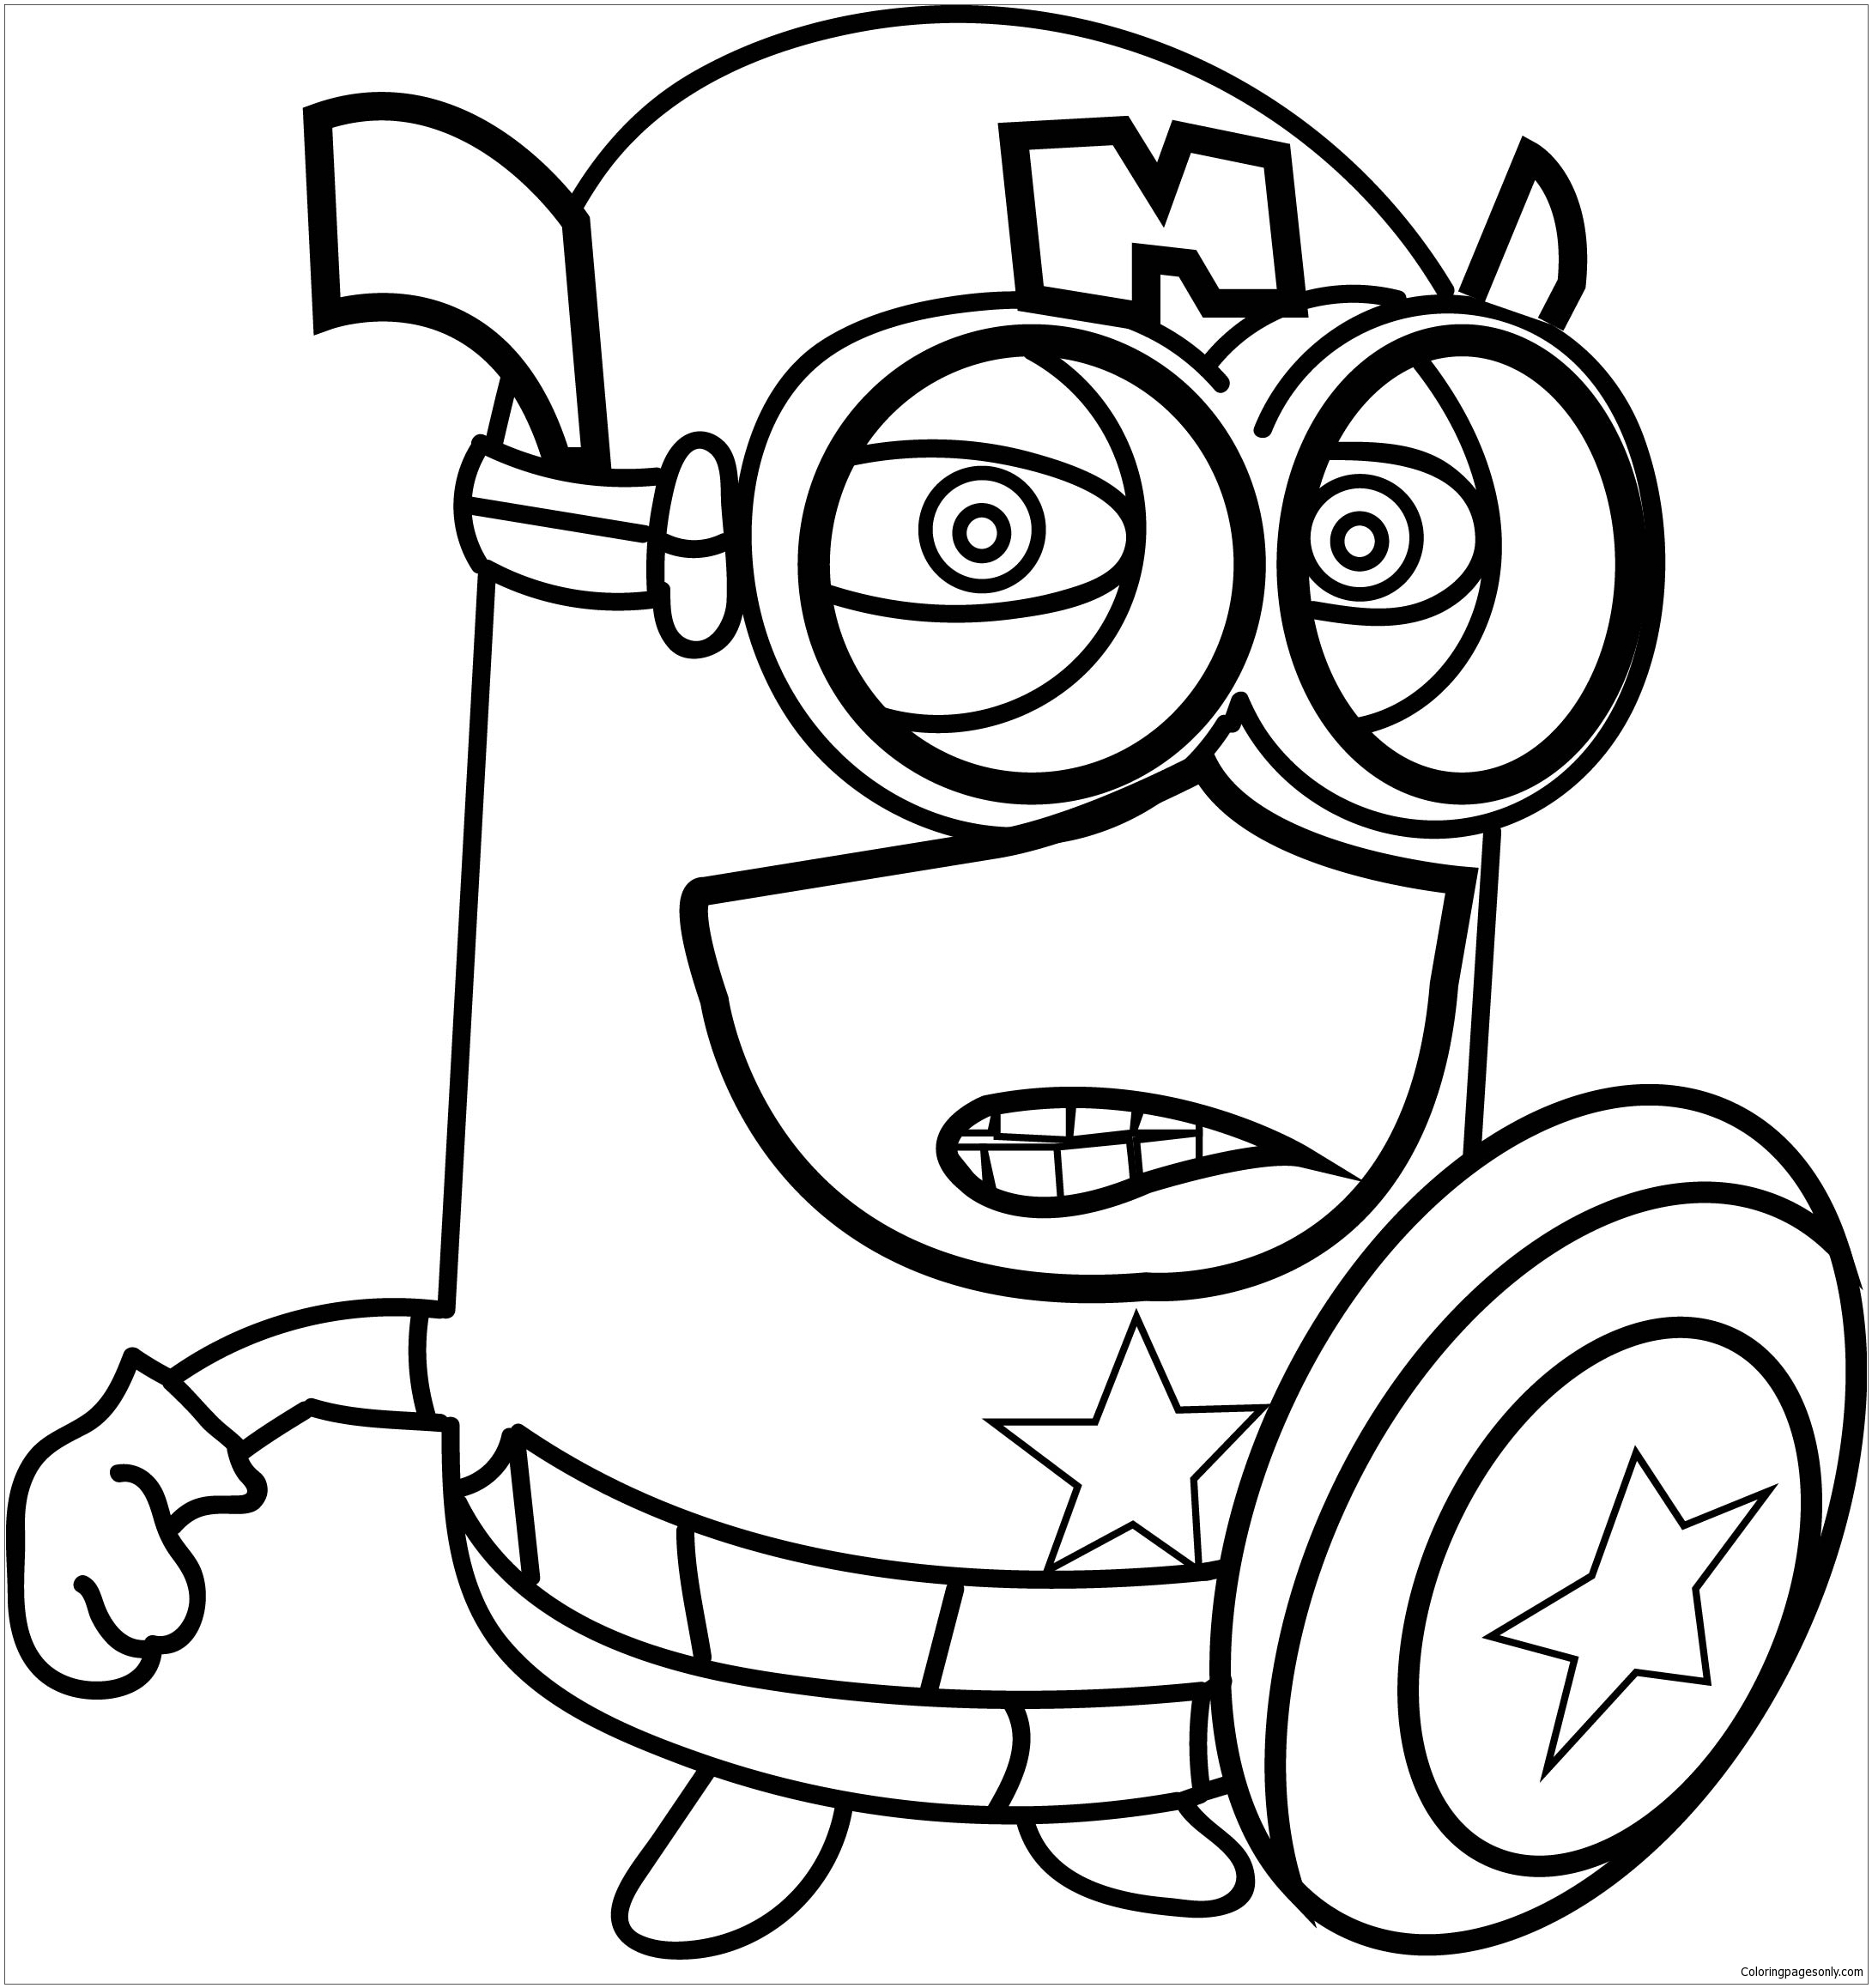 Download Angry Captain Minion Coloring Pages - Cartoons Coloring Pages - Free Printable Coloring Pages Online